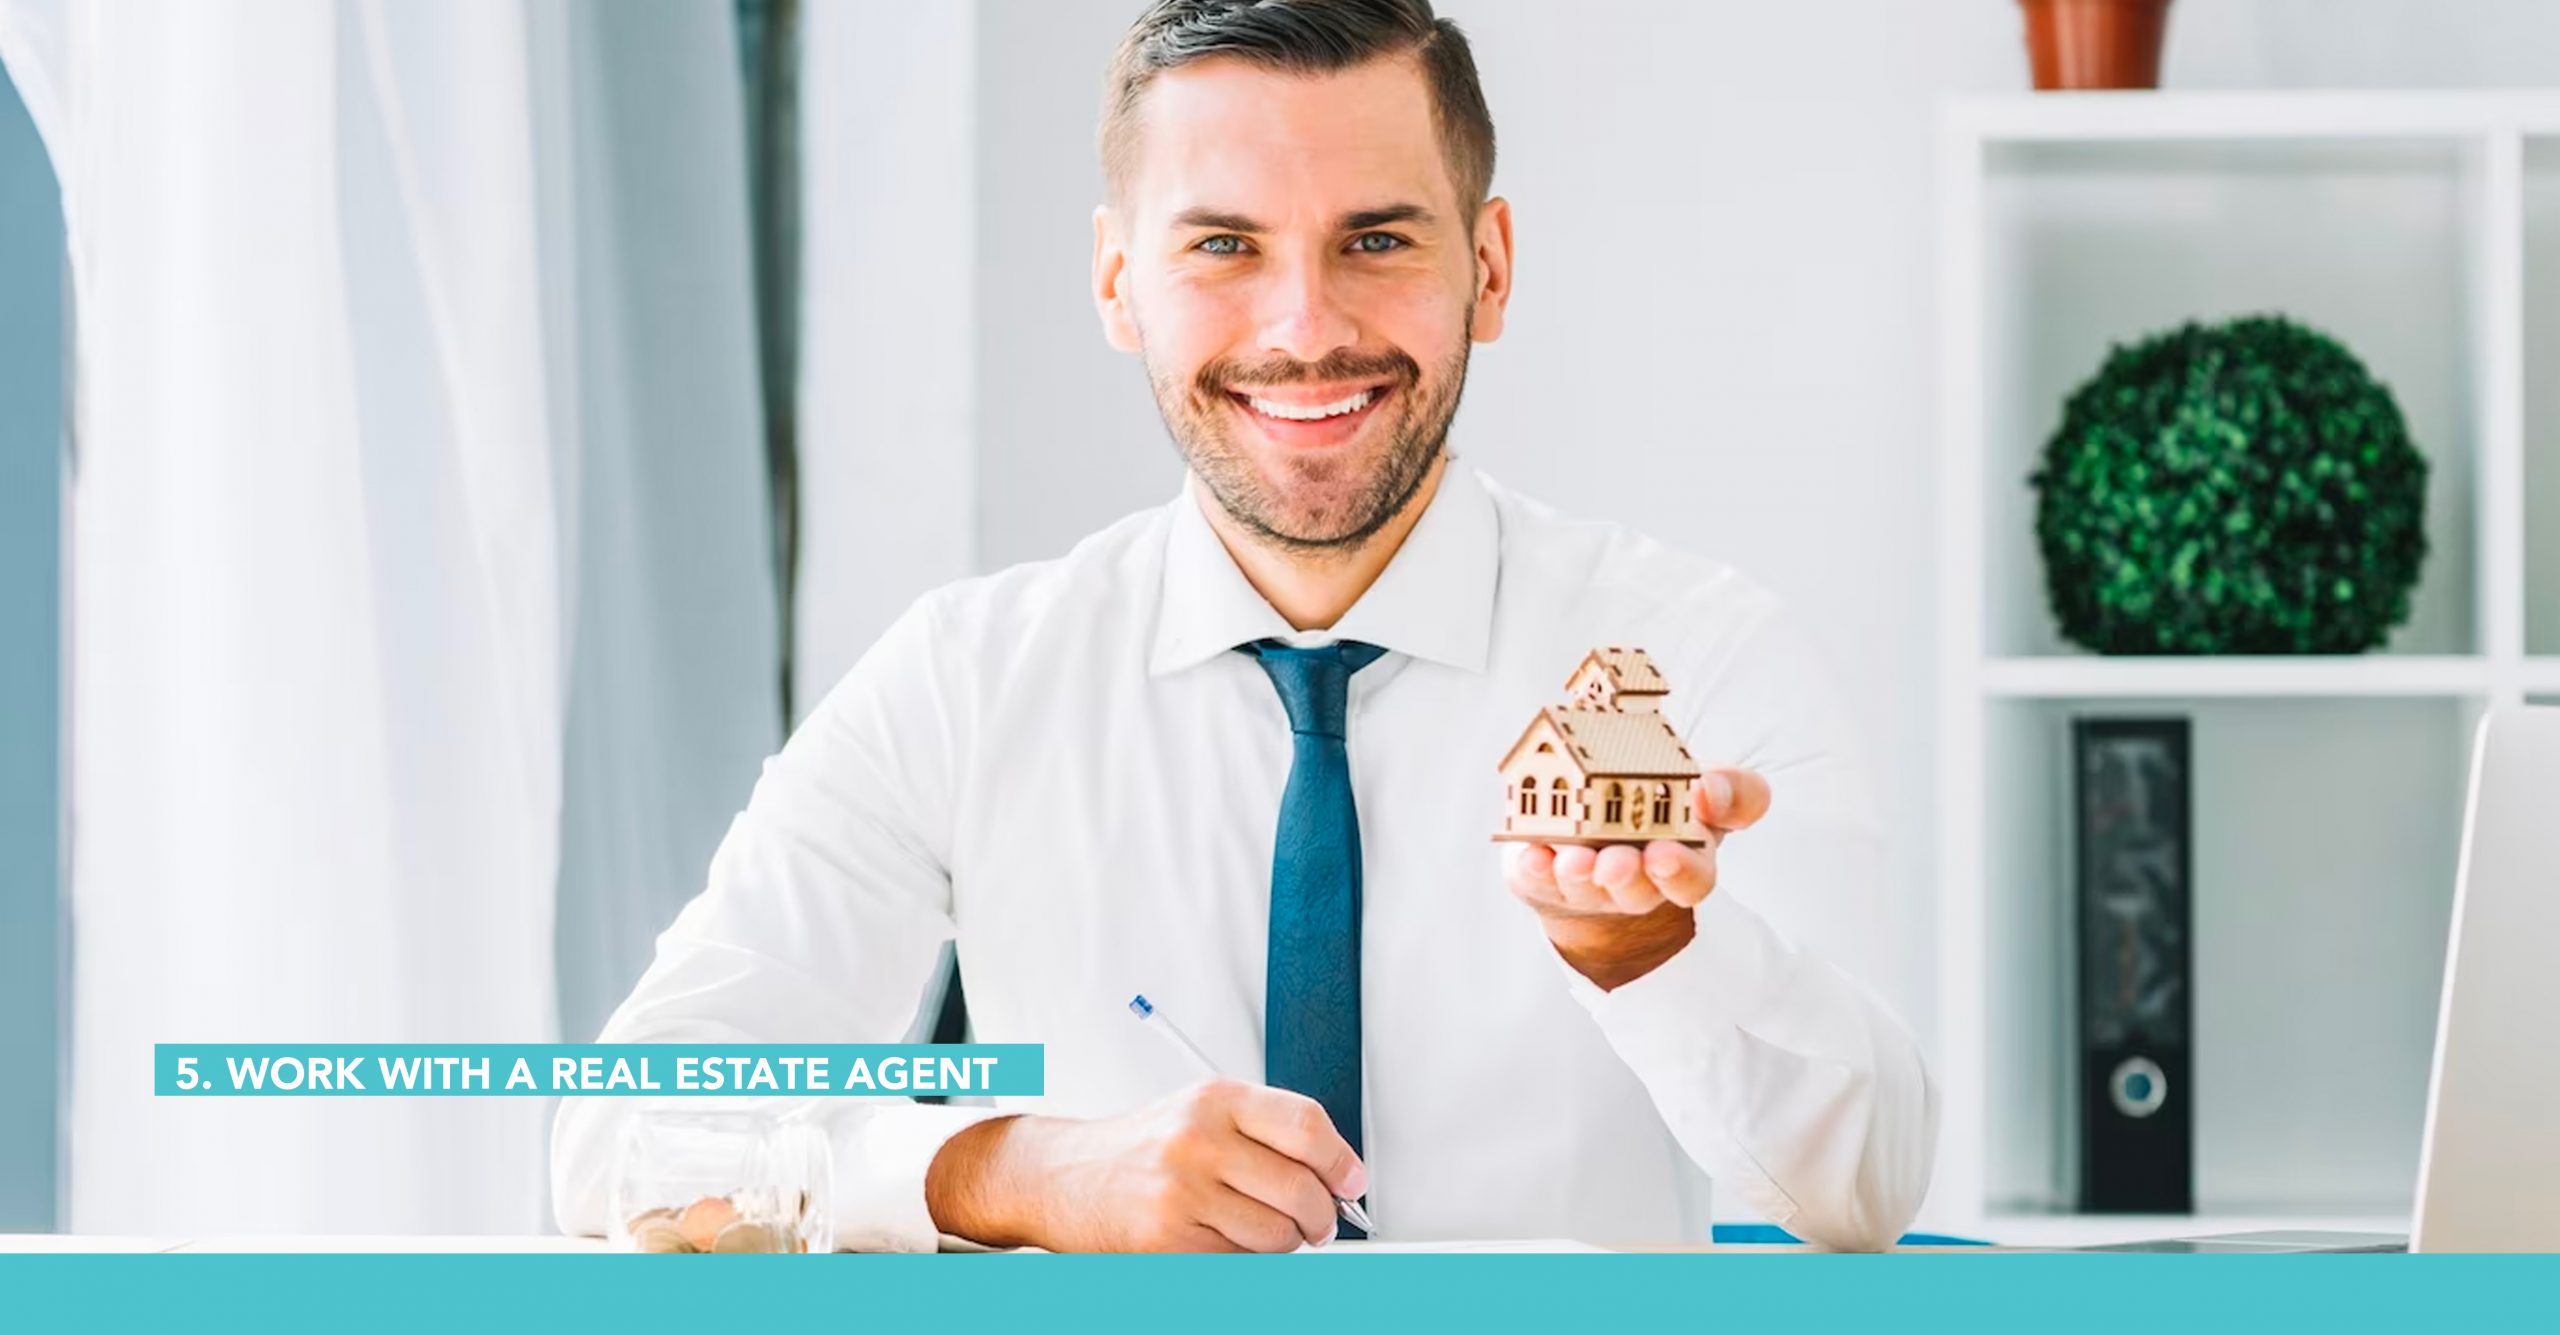 Work with a real estate agent